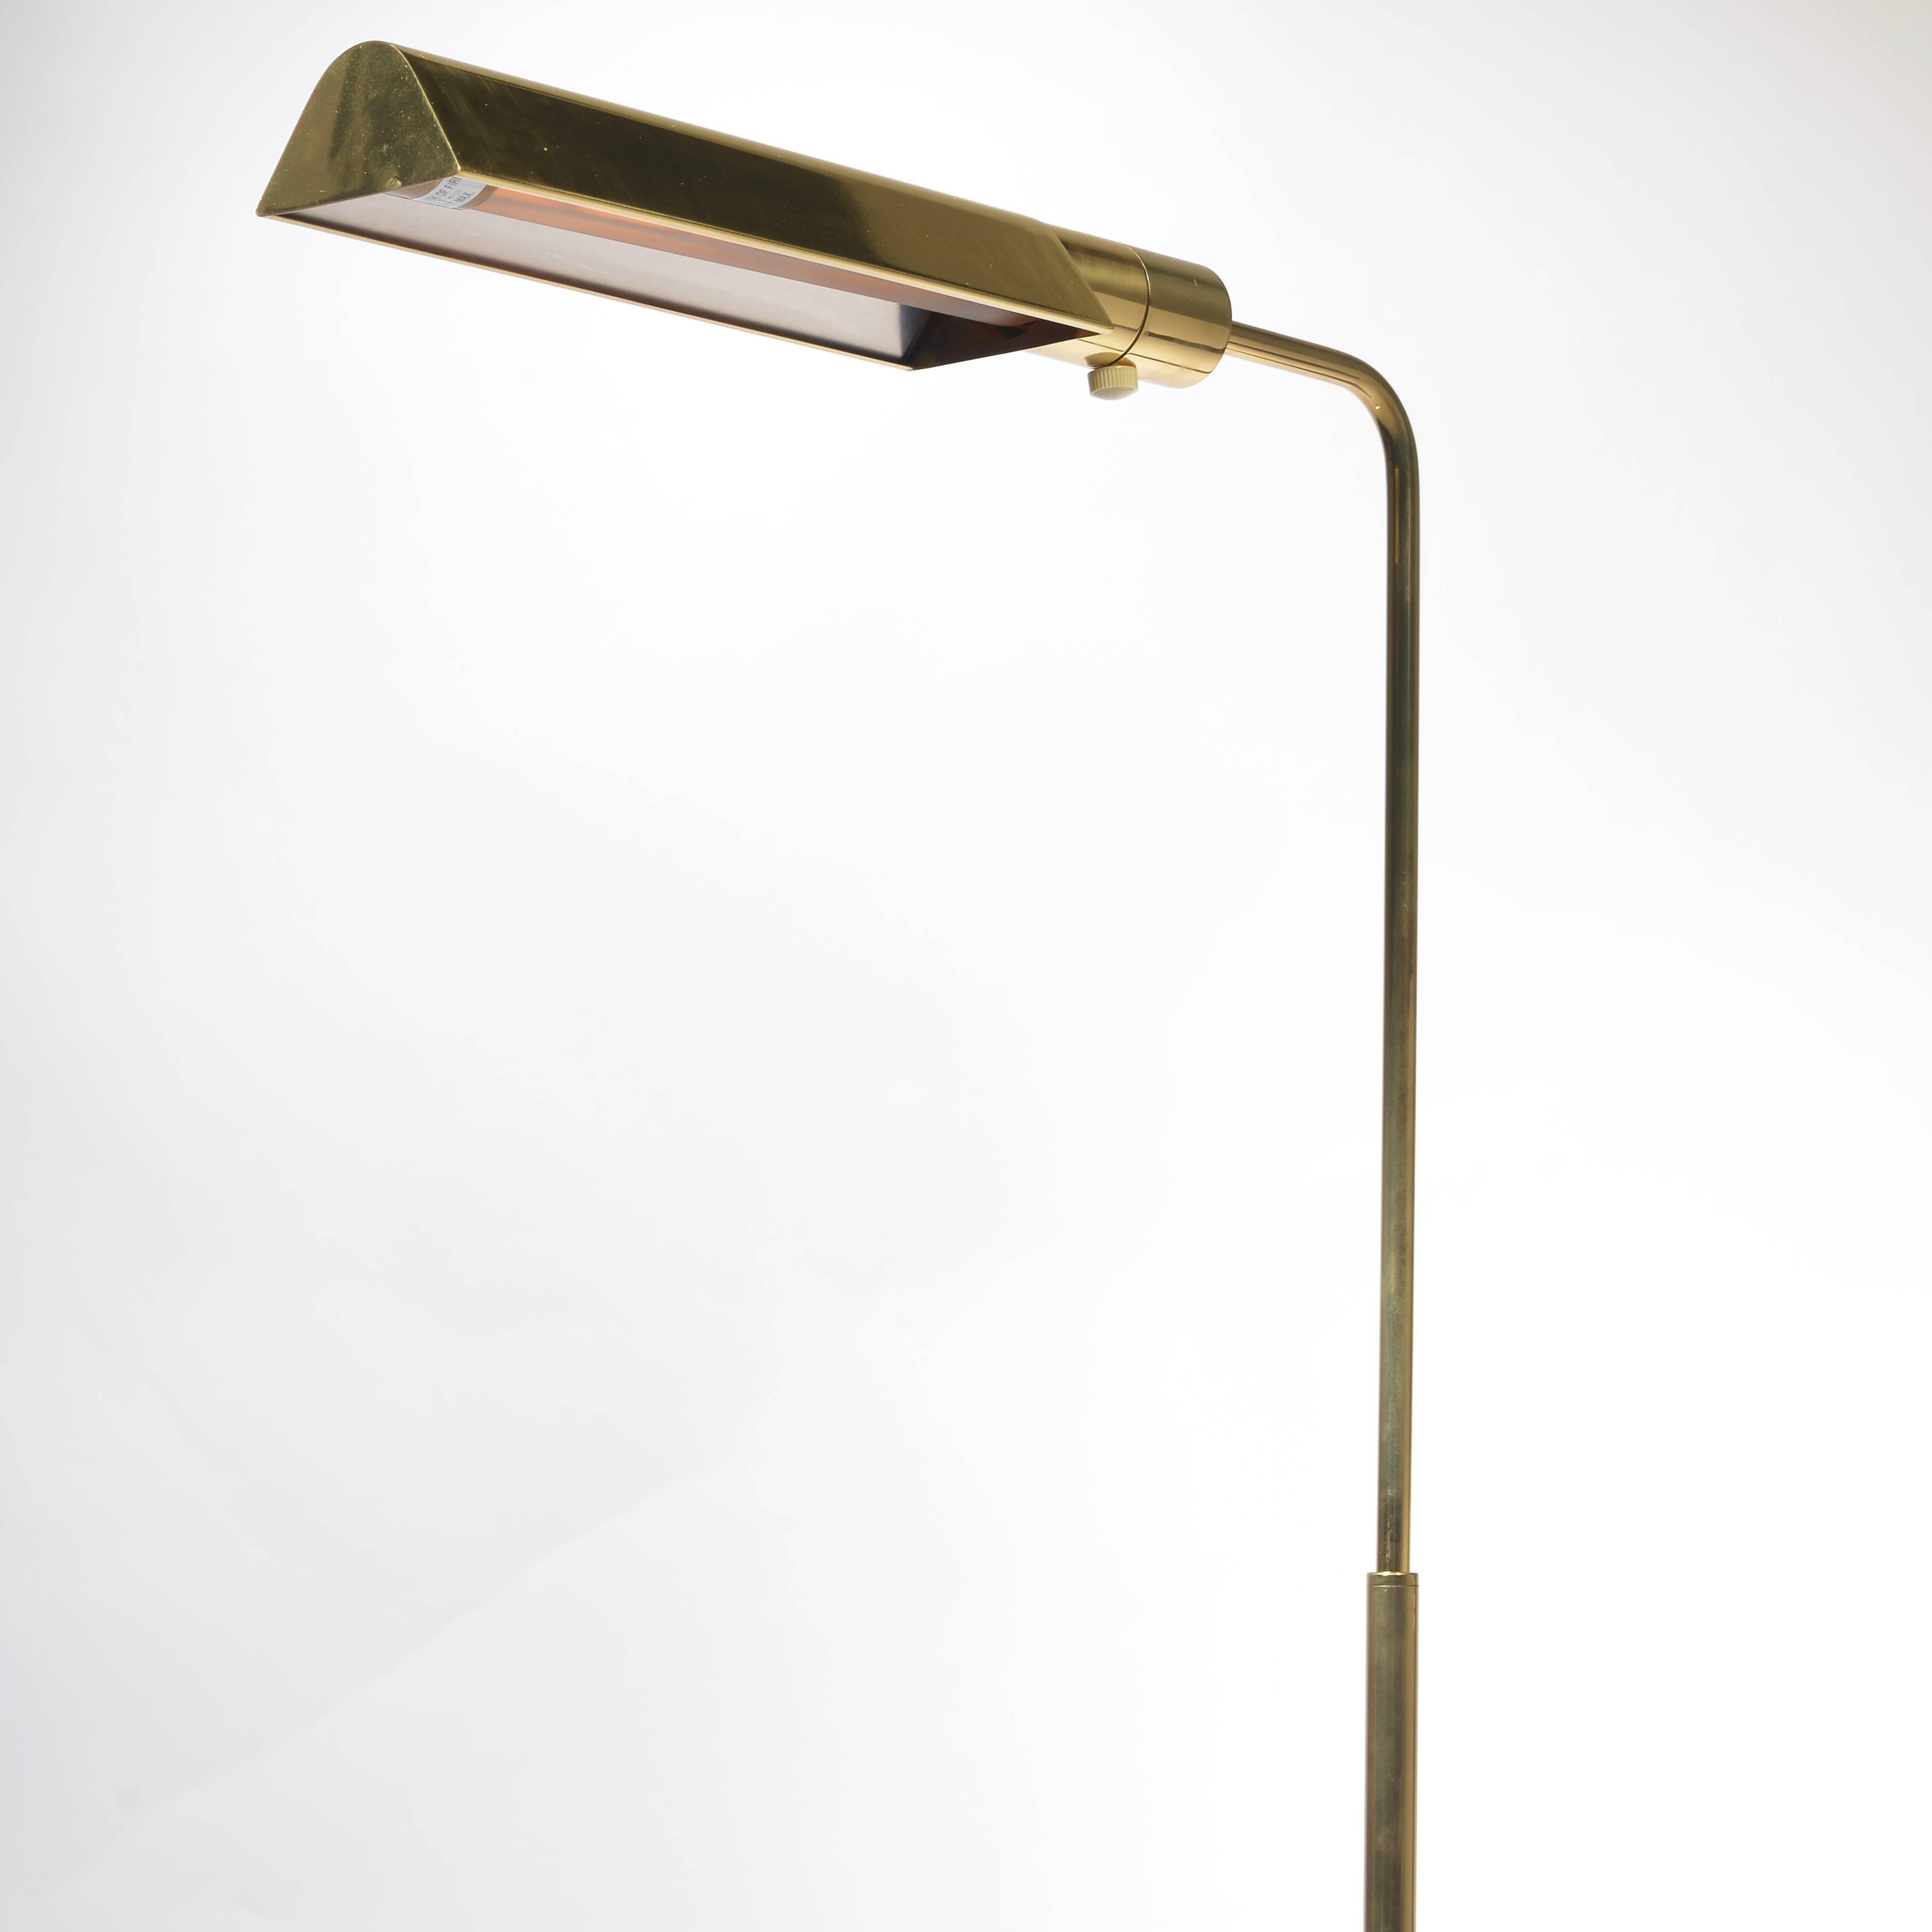 Late 20th Century Brass Swivel Floor Lamp by Casella with V-Base